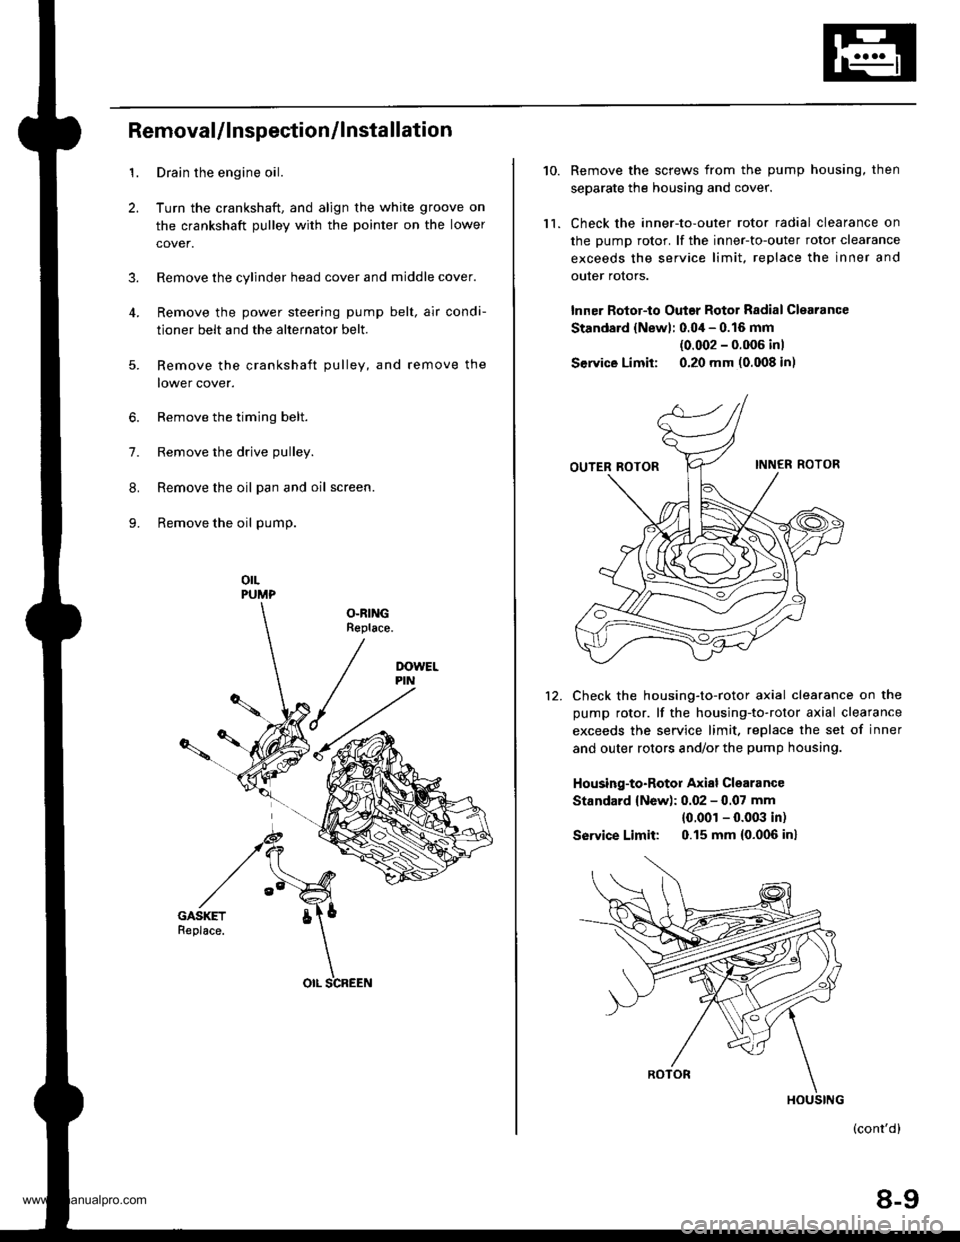 HONDA CR-V 1997 RD1-RD3 / 1.G Workshop Manual 
1.
2.
3.
RemovaUlnspection/lnstallation
Drain the engine oil.
Turn the crankshaft, and align the white groove on
the crankshaft pulley with the pointer on the lower
cover.
Remove the cylinder head co